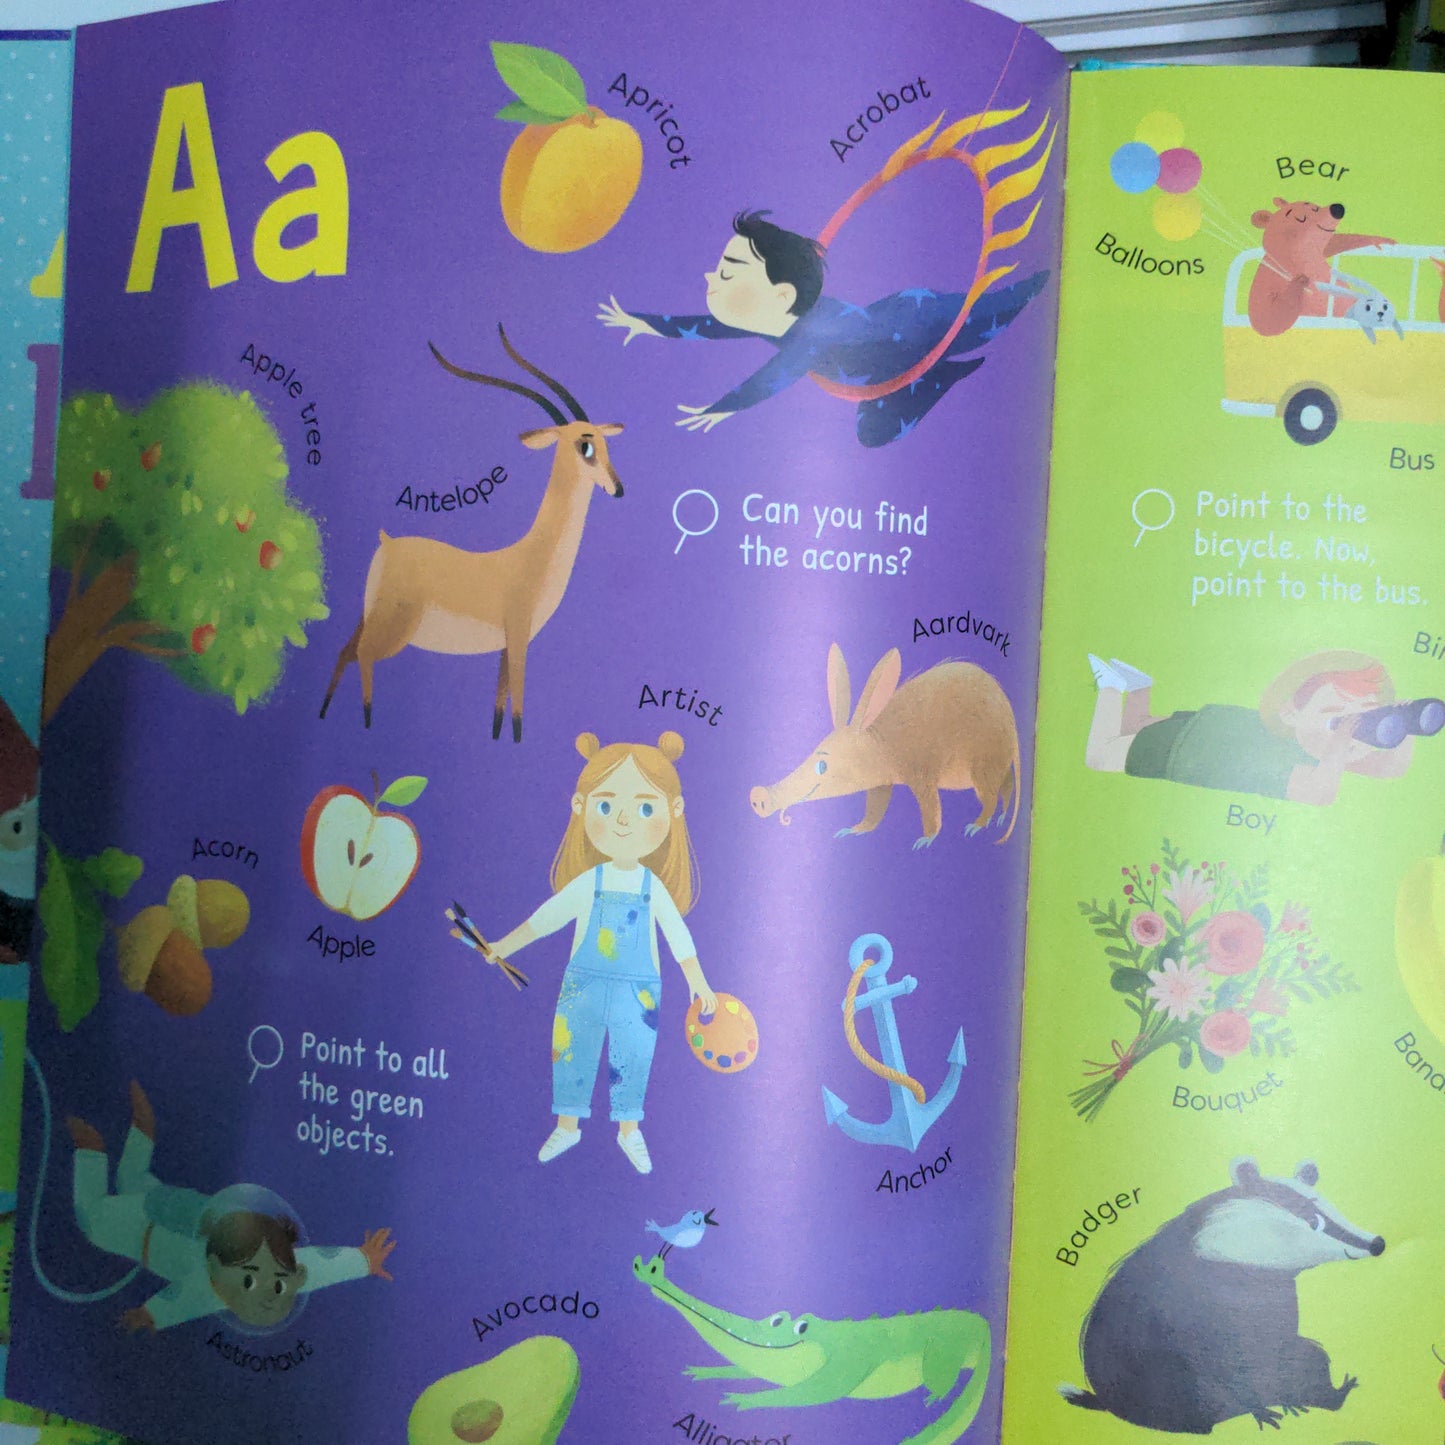 The Big Book of ABCs